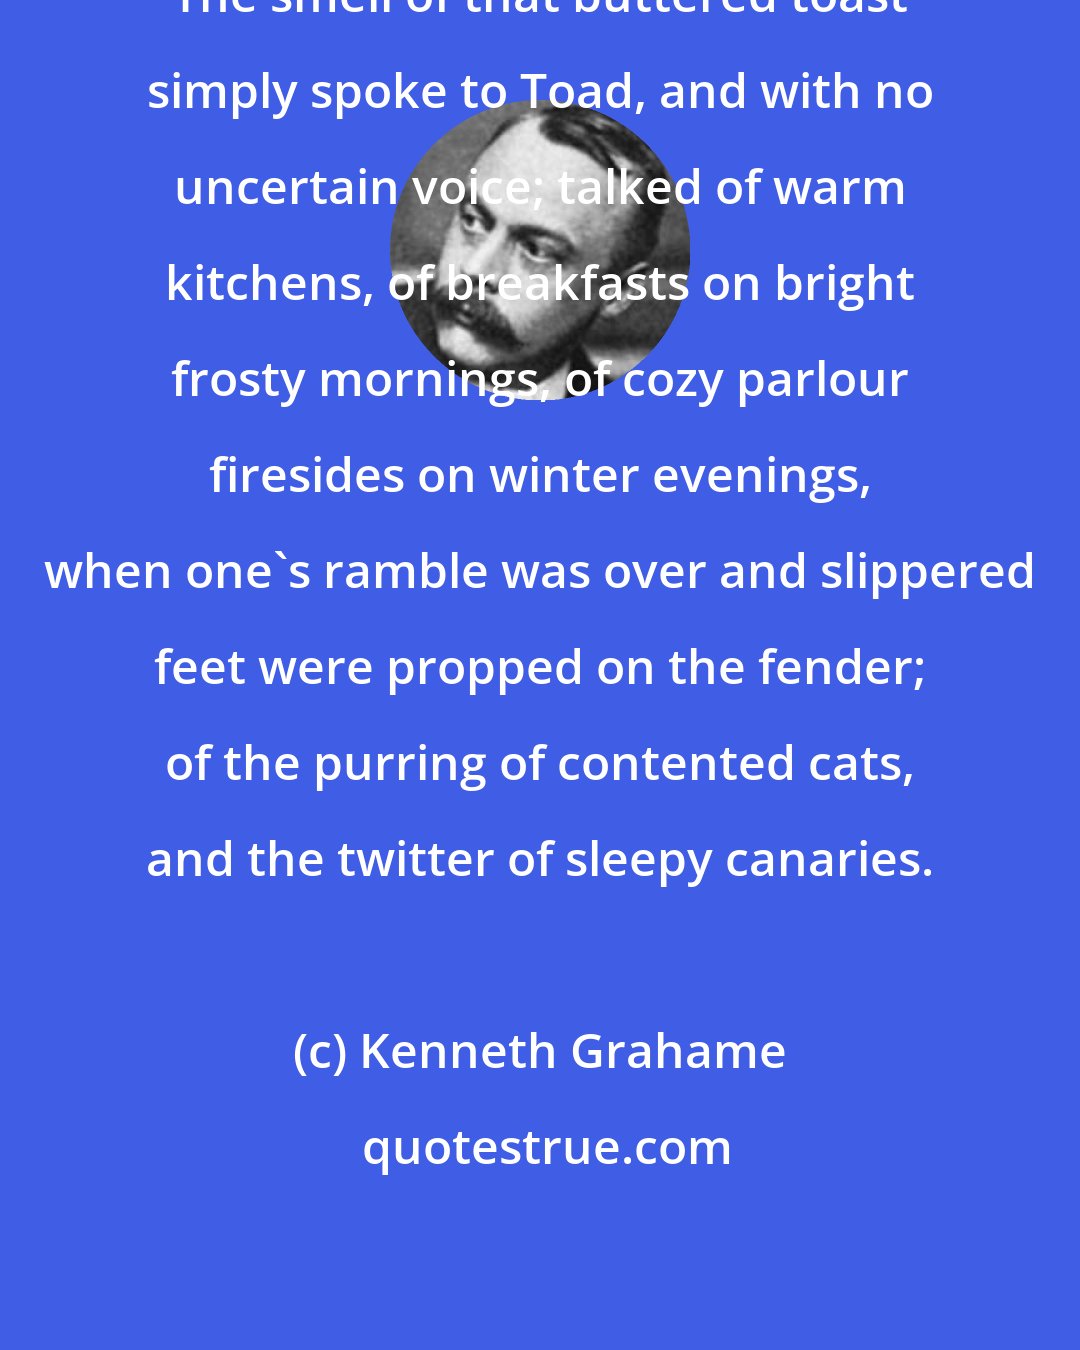 Kenneth Grahame: The smell of that buttered toast simply spoke to Toad, and with no uncertain voice; talked of warm kitchens, of breakfasts on bright frosty mornings, of cozy parlour firesides on winter evenings, when one's ramble was over and slippered feet were propped on the fender; of the purring of contented cats, and the twitter of sleepy canaries.